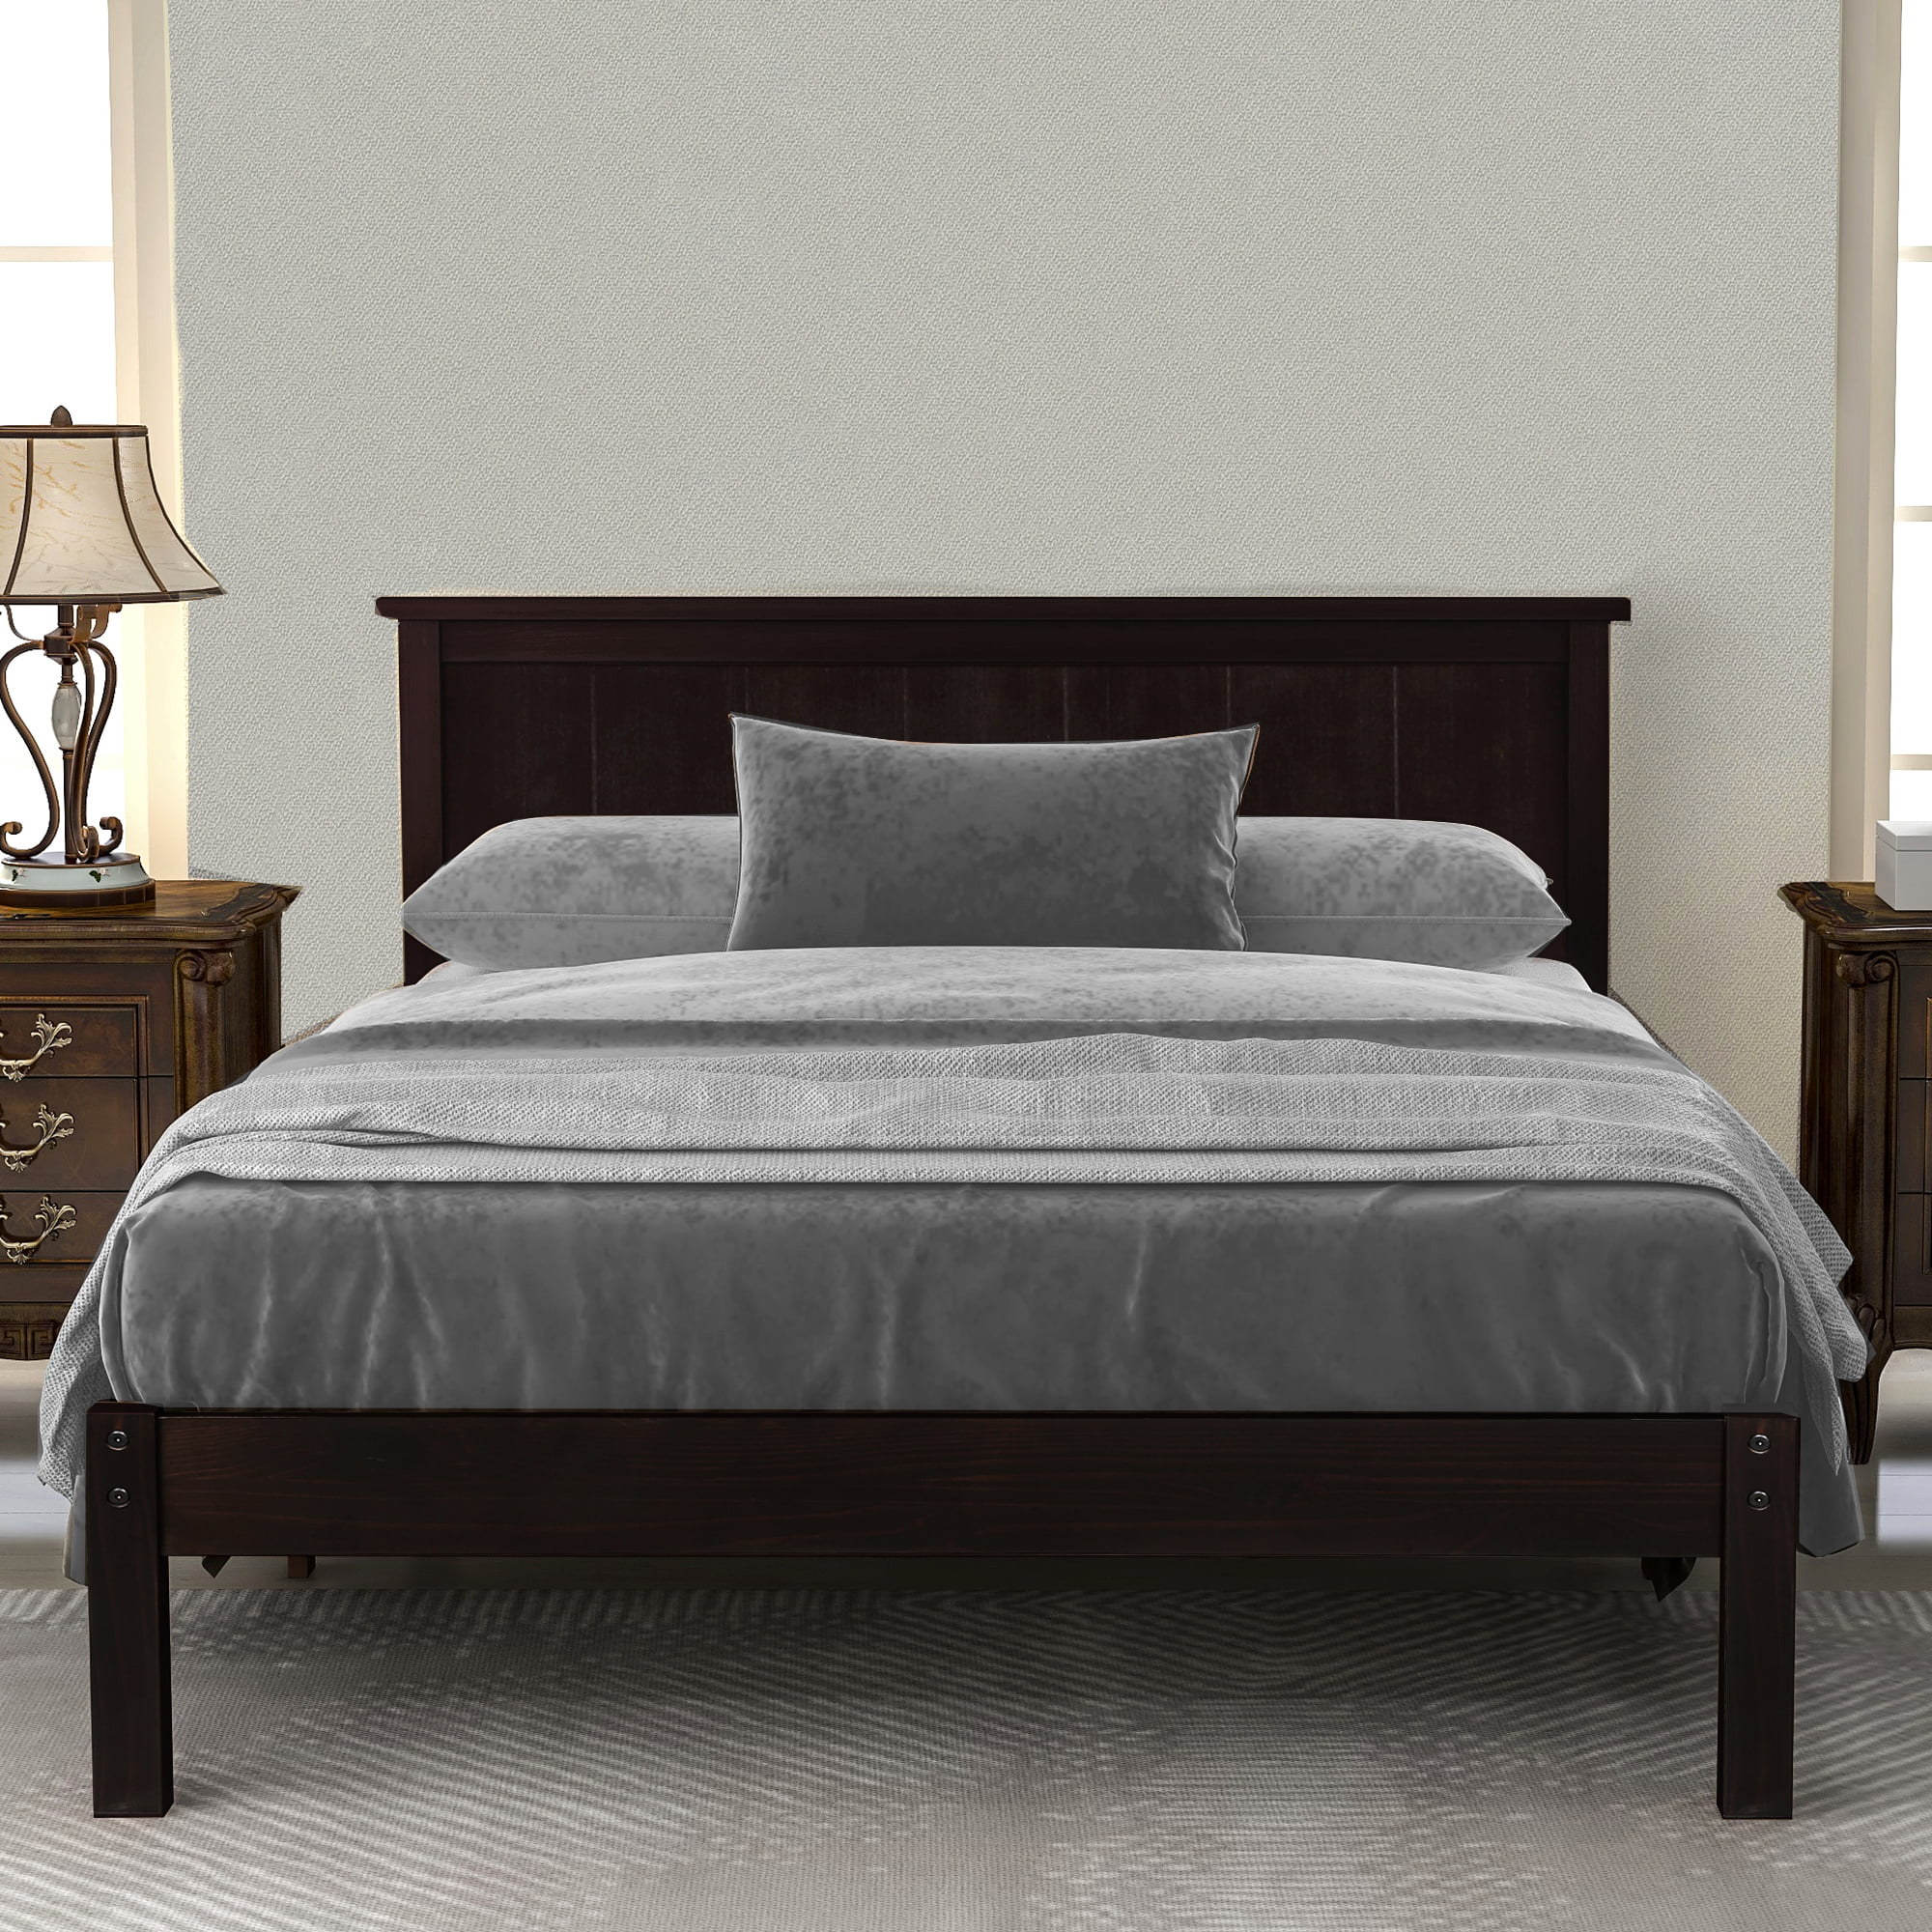 Clearance Queen Platform Bed Frame Newest Wooden Queen Bed Frame